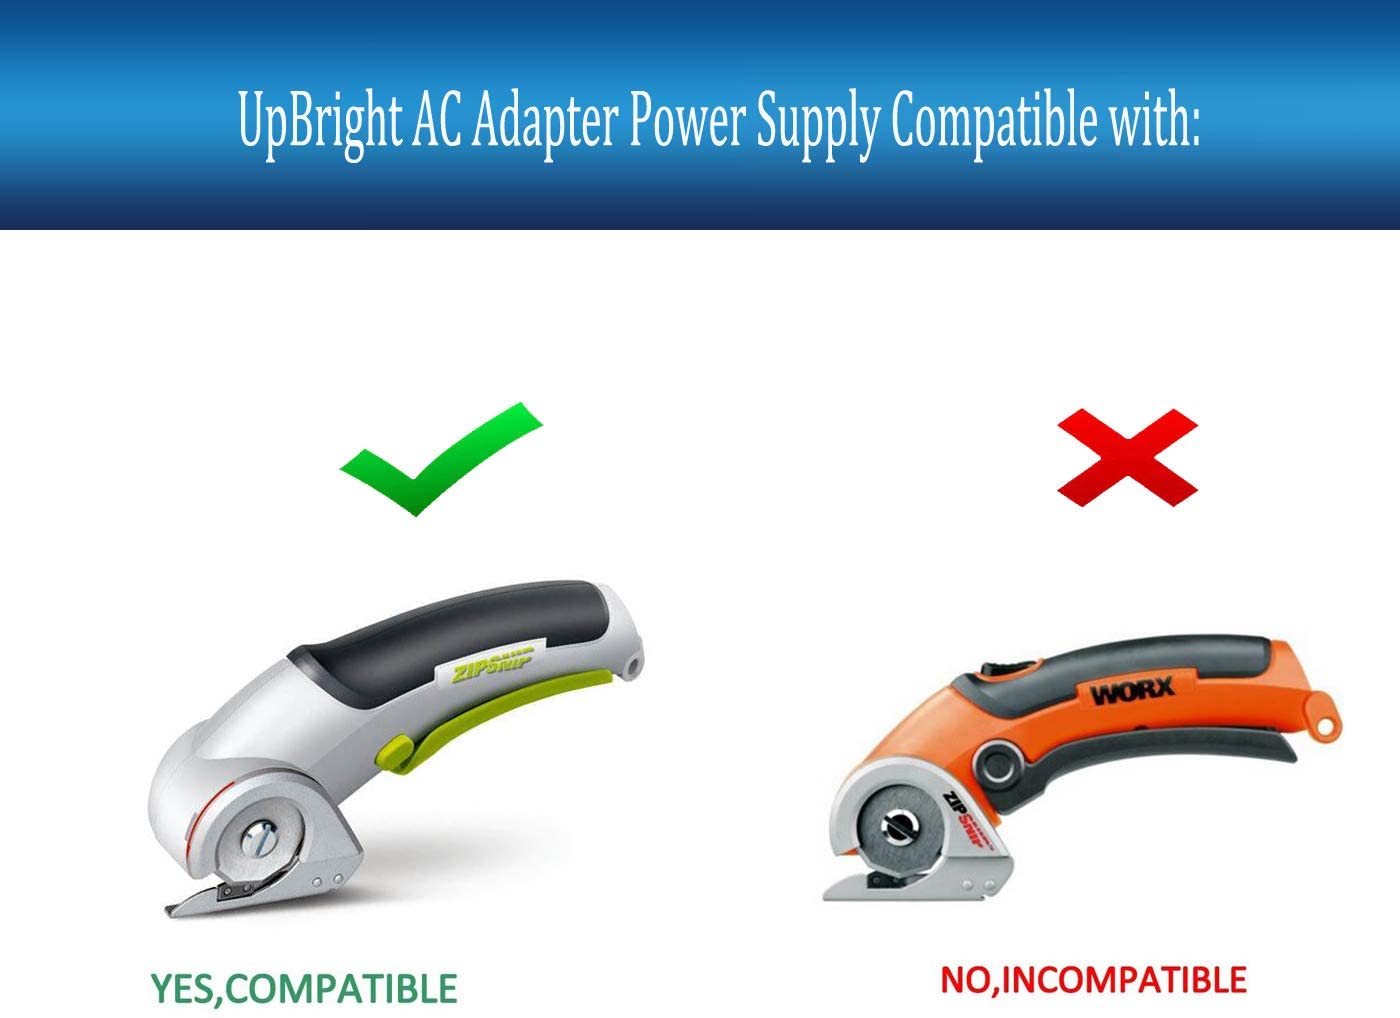 UPBRIGHT 5V AC/DC Adapter Compatible with ZipSnip RC2602 M RC2602M Zip Snip  RC2600 ShopSeries Rockwell 3.6V Lithium Battery Cutter Cutting Tool